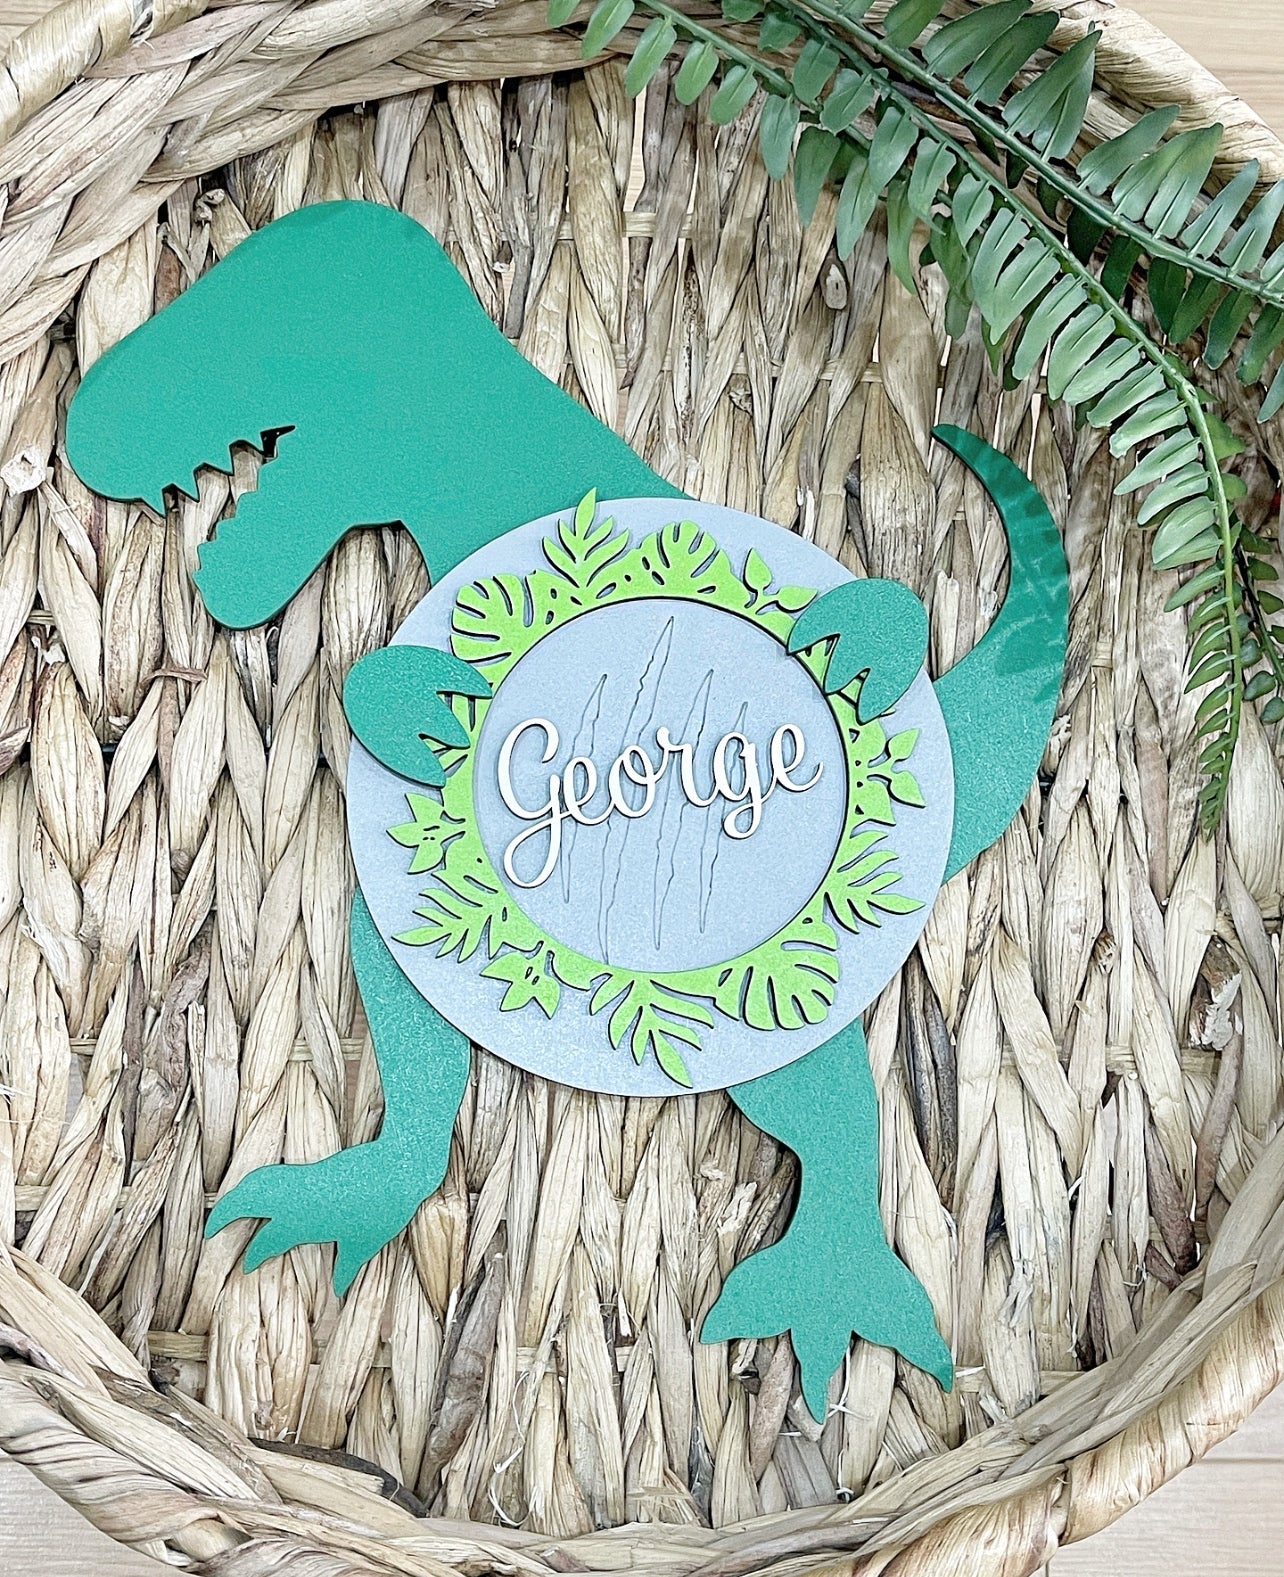 T-Rex Holding Plaque - Cute as a Button by Laura